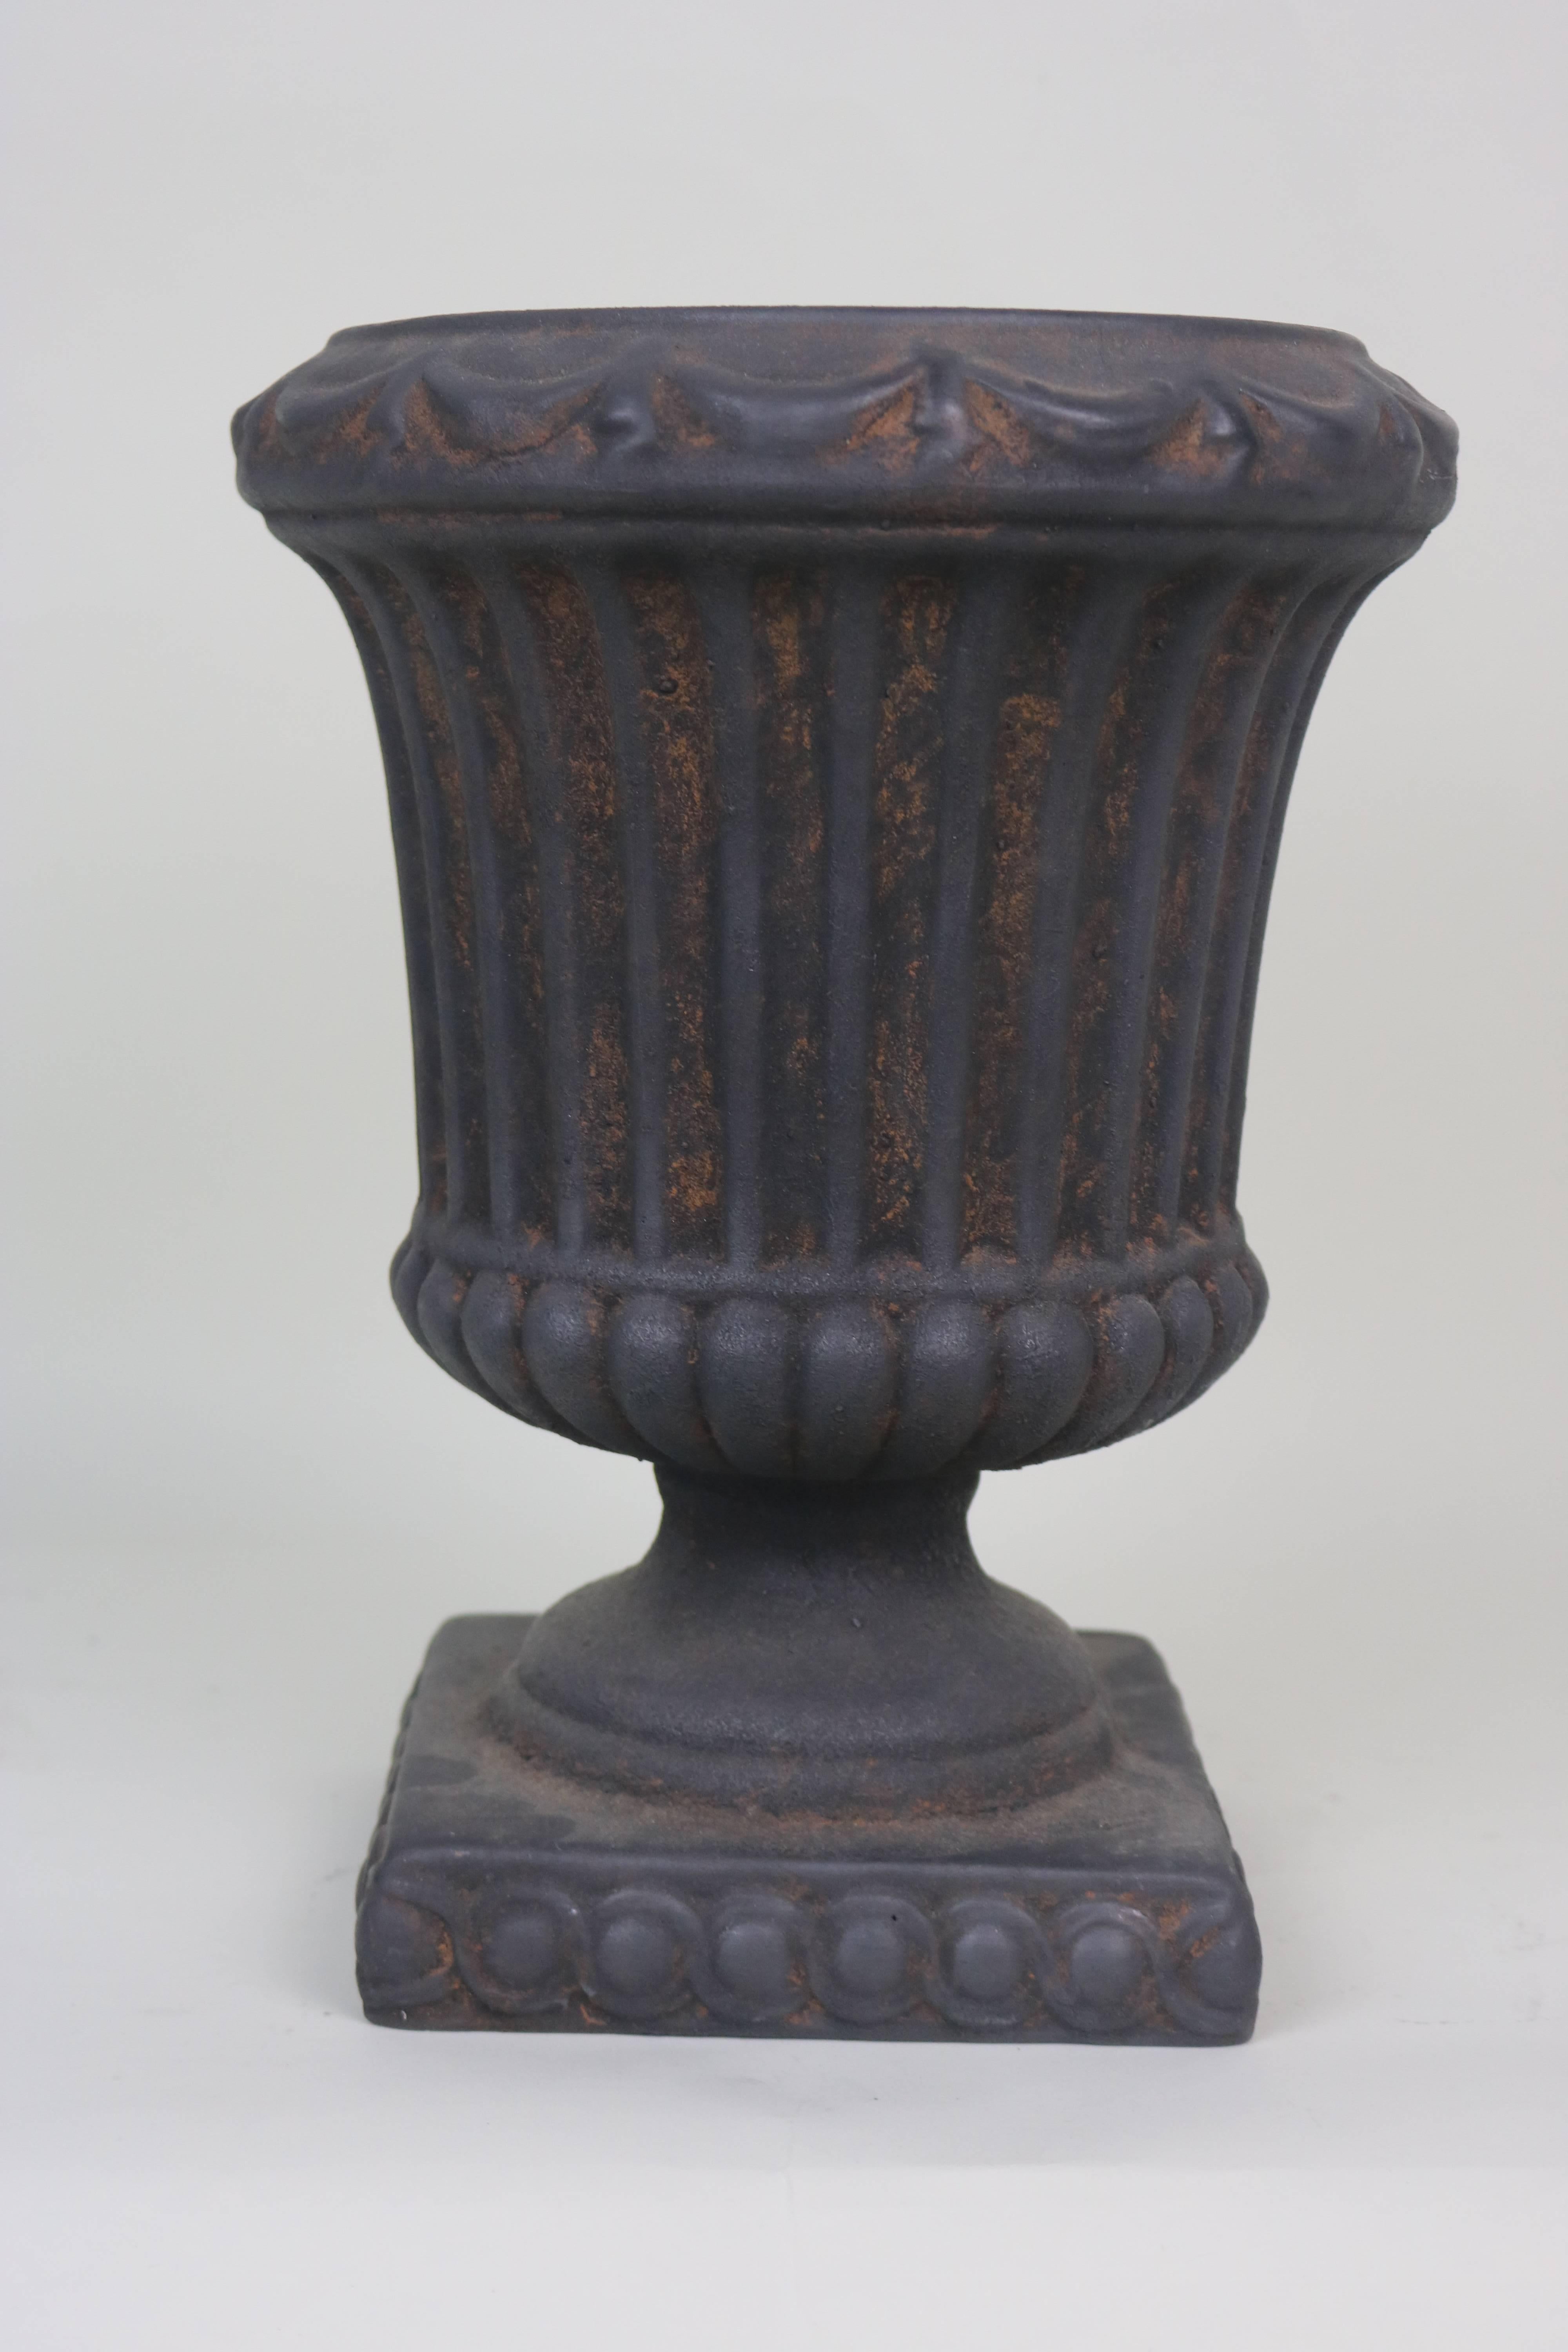 A distinctive high style terra cotta matte black urn planter with slight rusticated old world look, jardinière, planter, with classical patterns nicely articulated-fluted, ribbon top border, guilloche trim base. 
A decorative urn for decor with